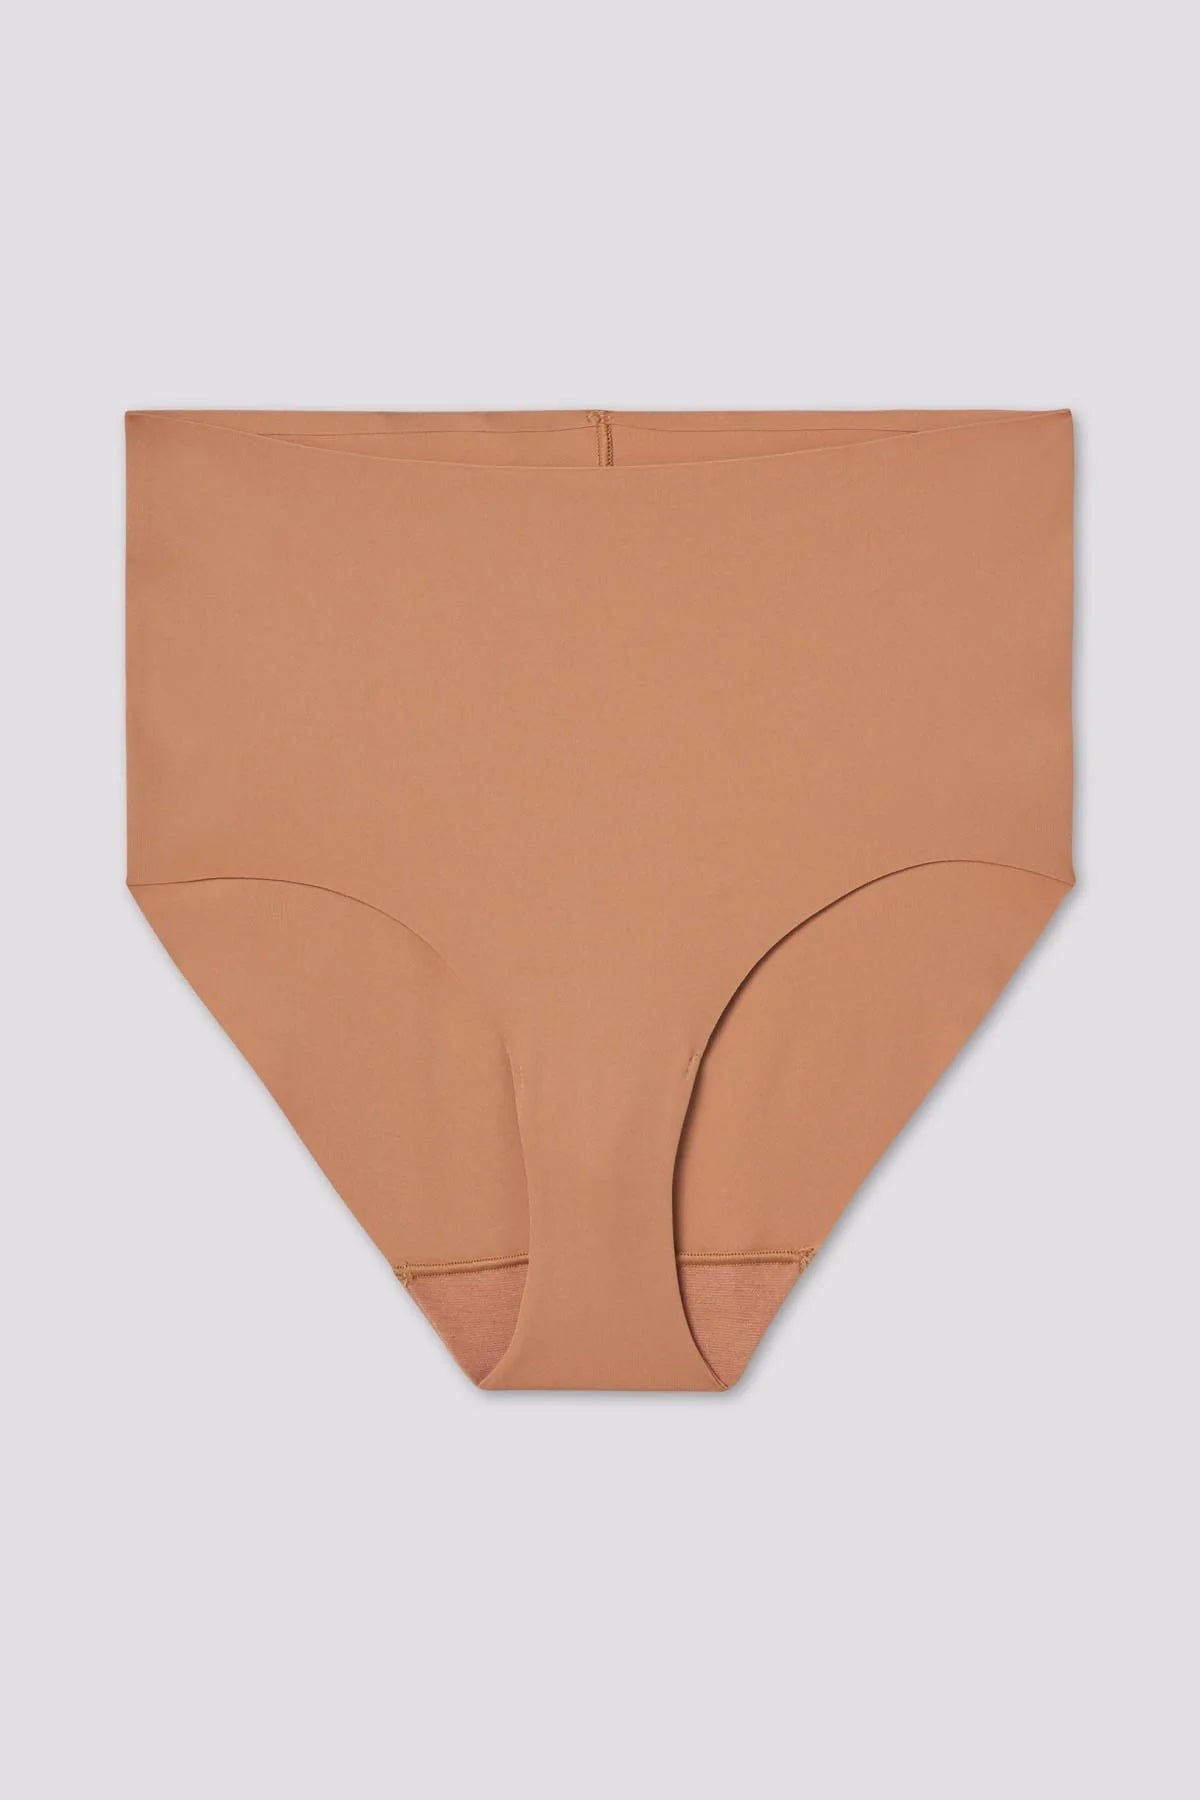 Girlfriend Collective High-Rise Brief in Toast